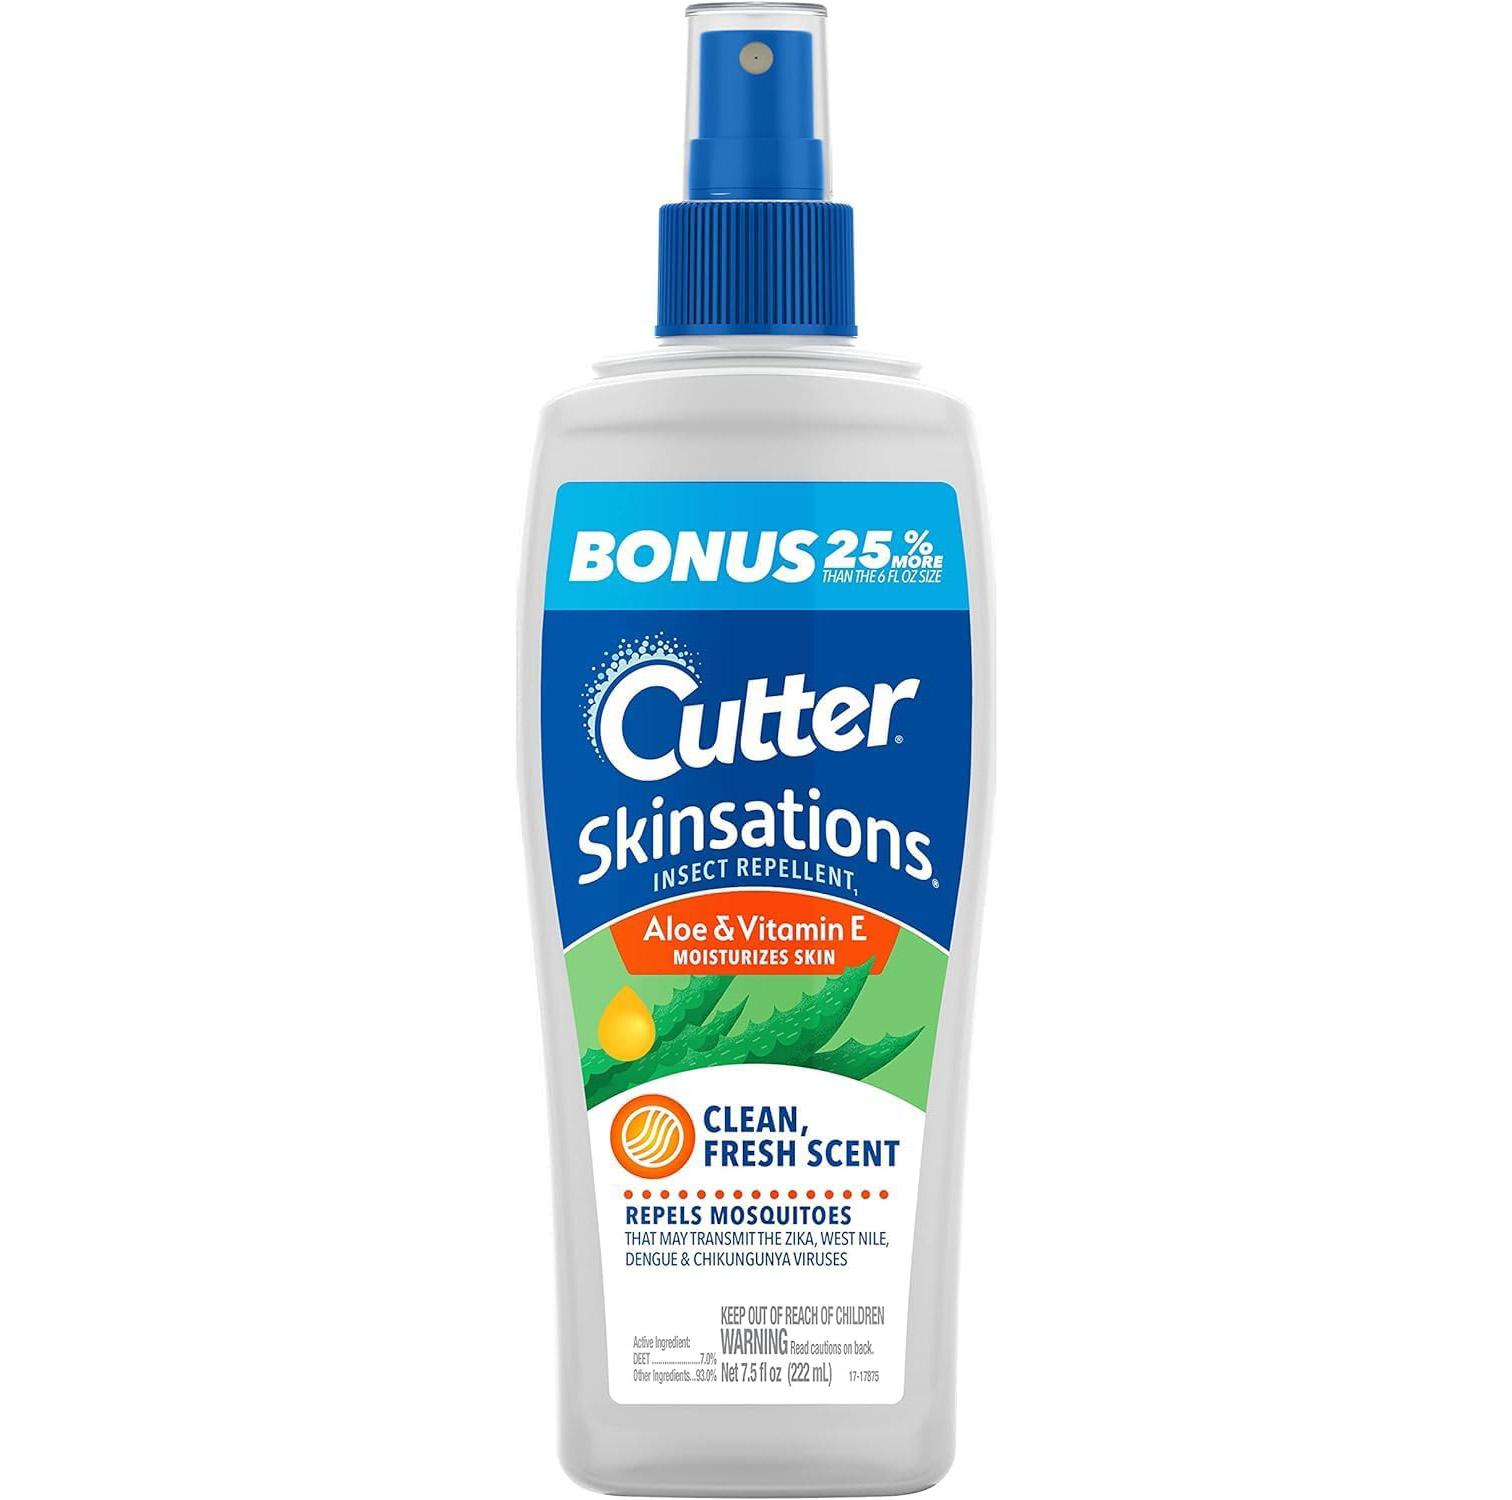 Cutter Skinsations Insect Repellent Pump Spray for $2.95